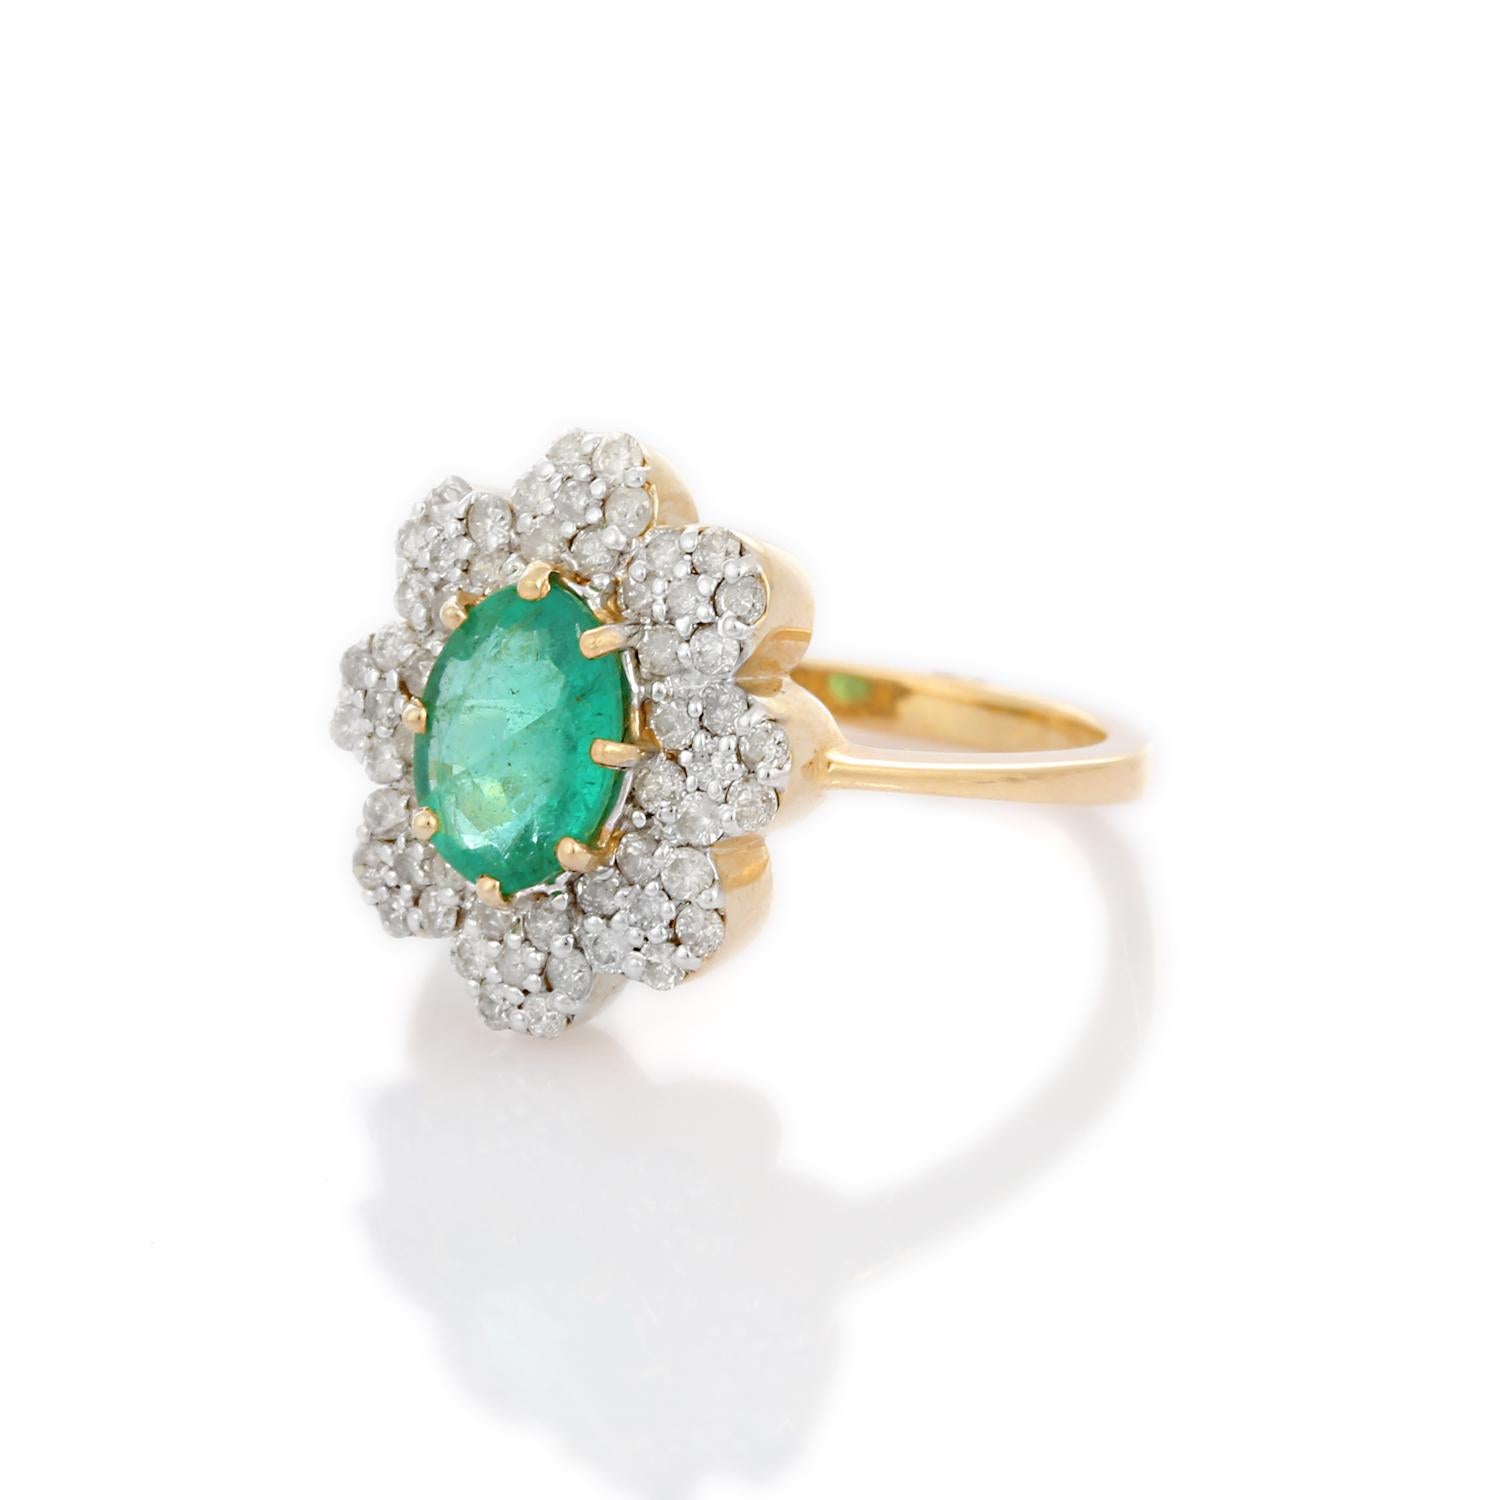 For Sale:  Exquisite 14K Solid Yellow Gold Emerald Ring with Clustered Diamonds 3